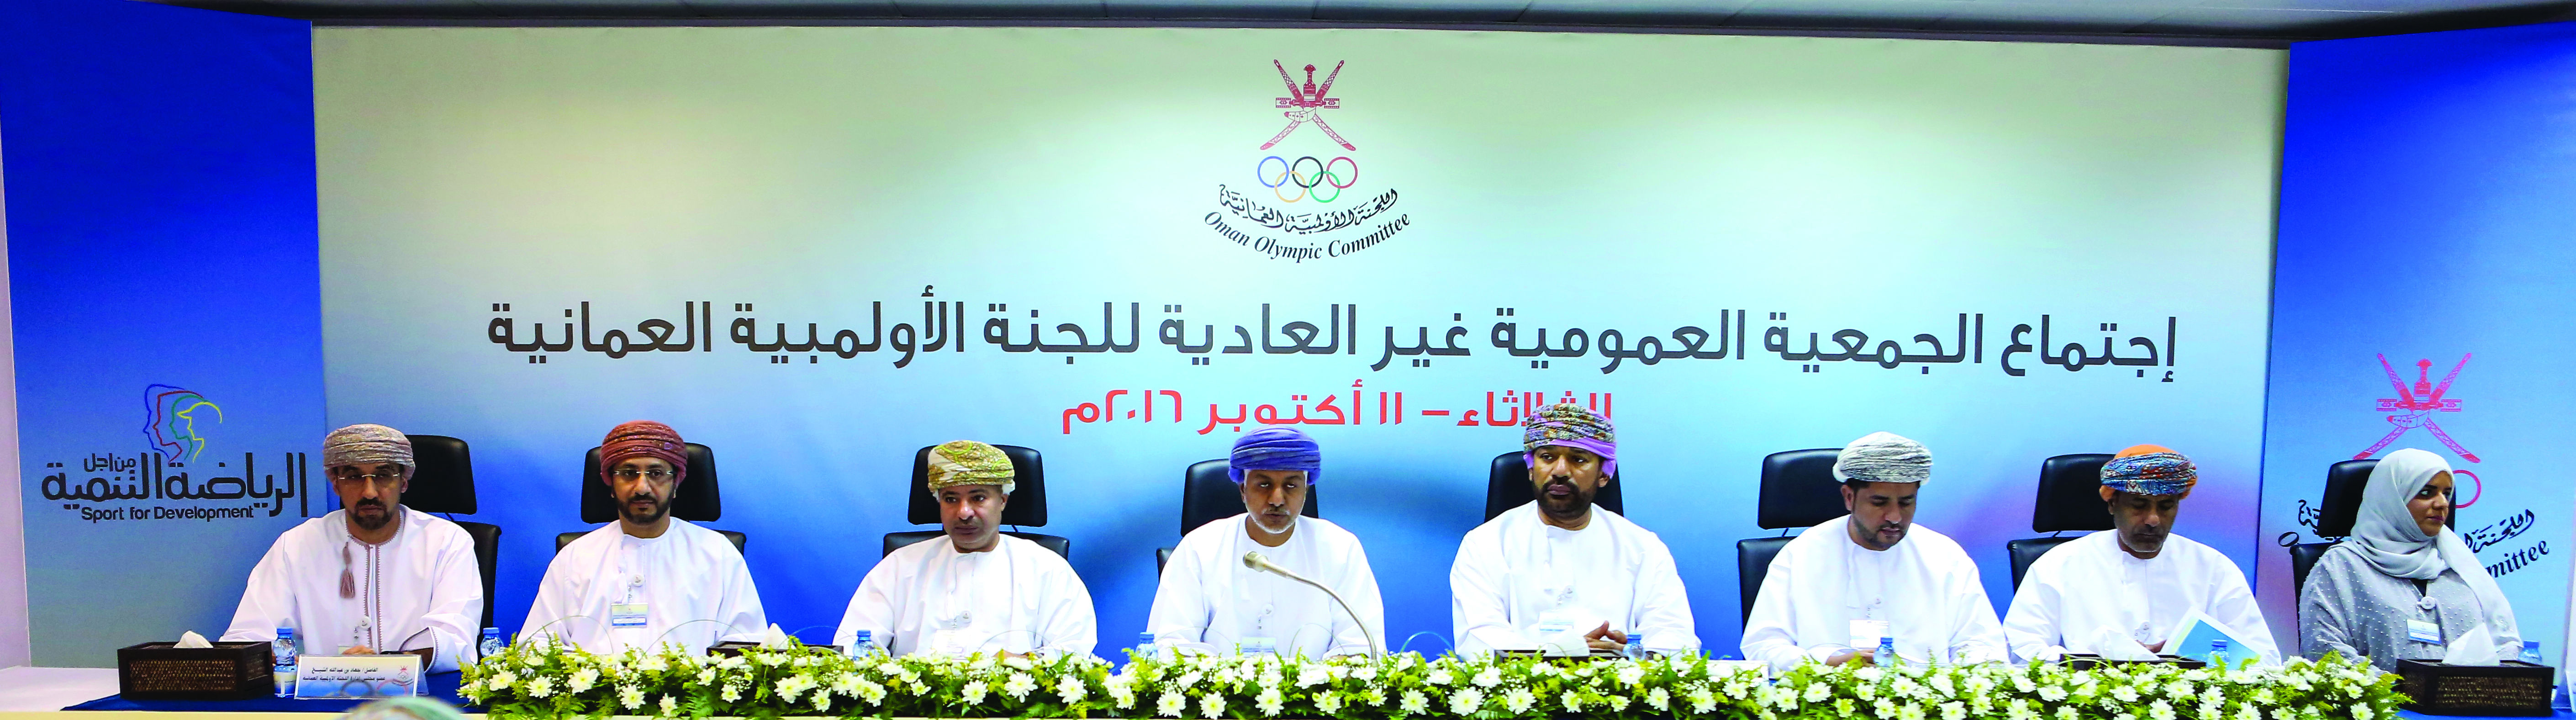 Oman Olympic Committee: Four 'sports personalities' picked for OOC roles